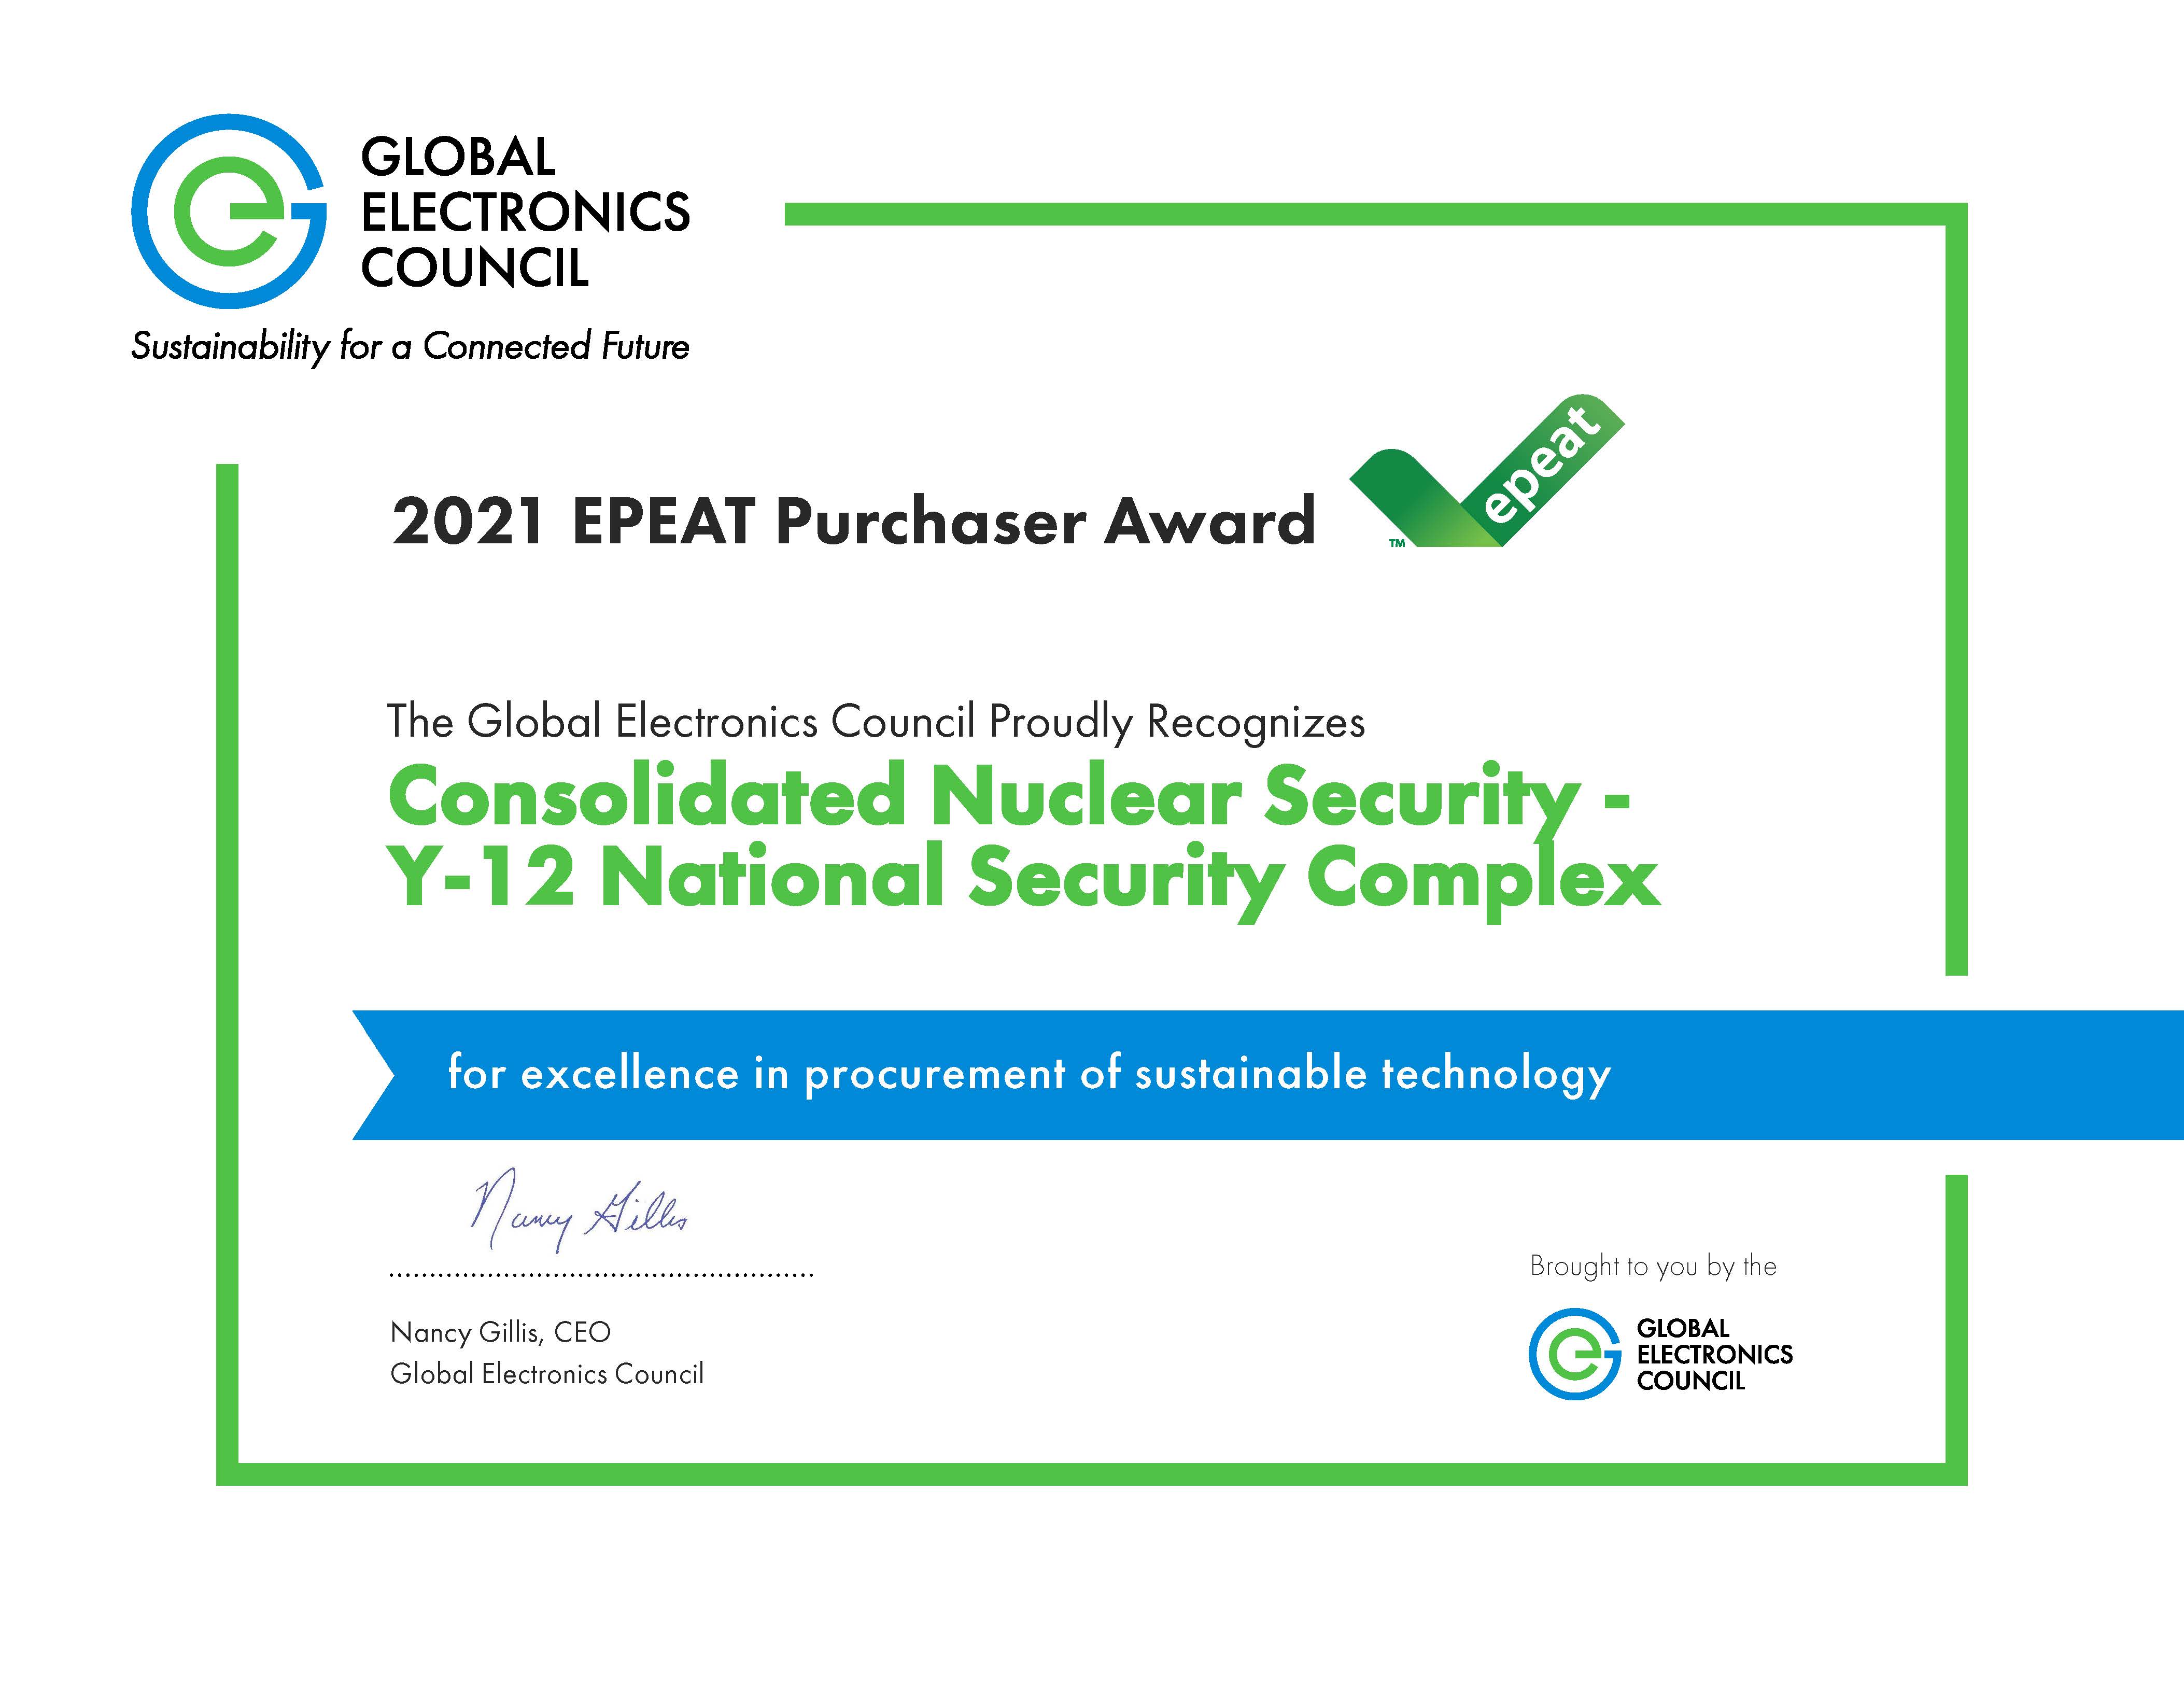 EPEAT Purchaser Award